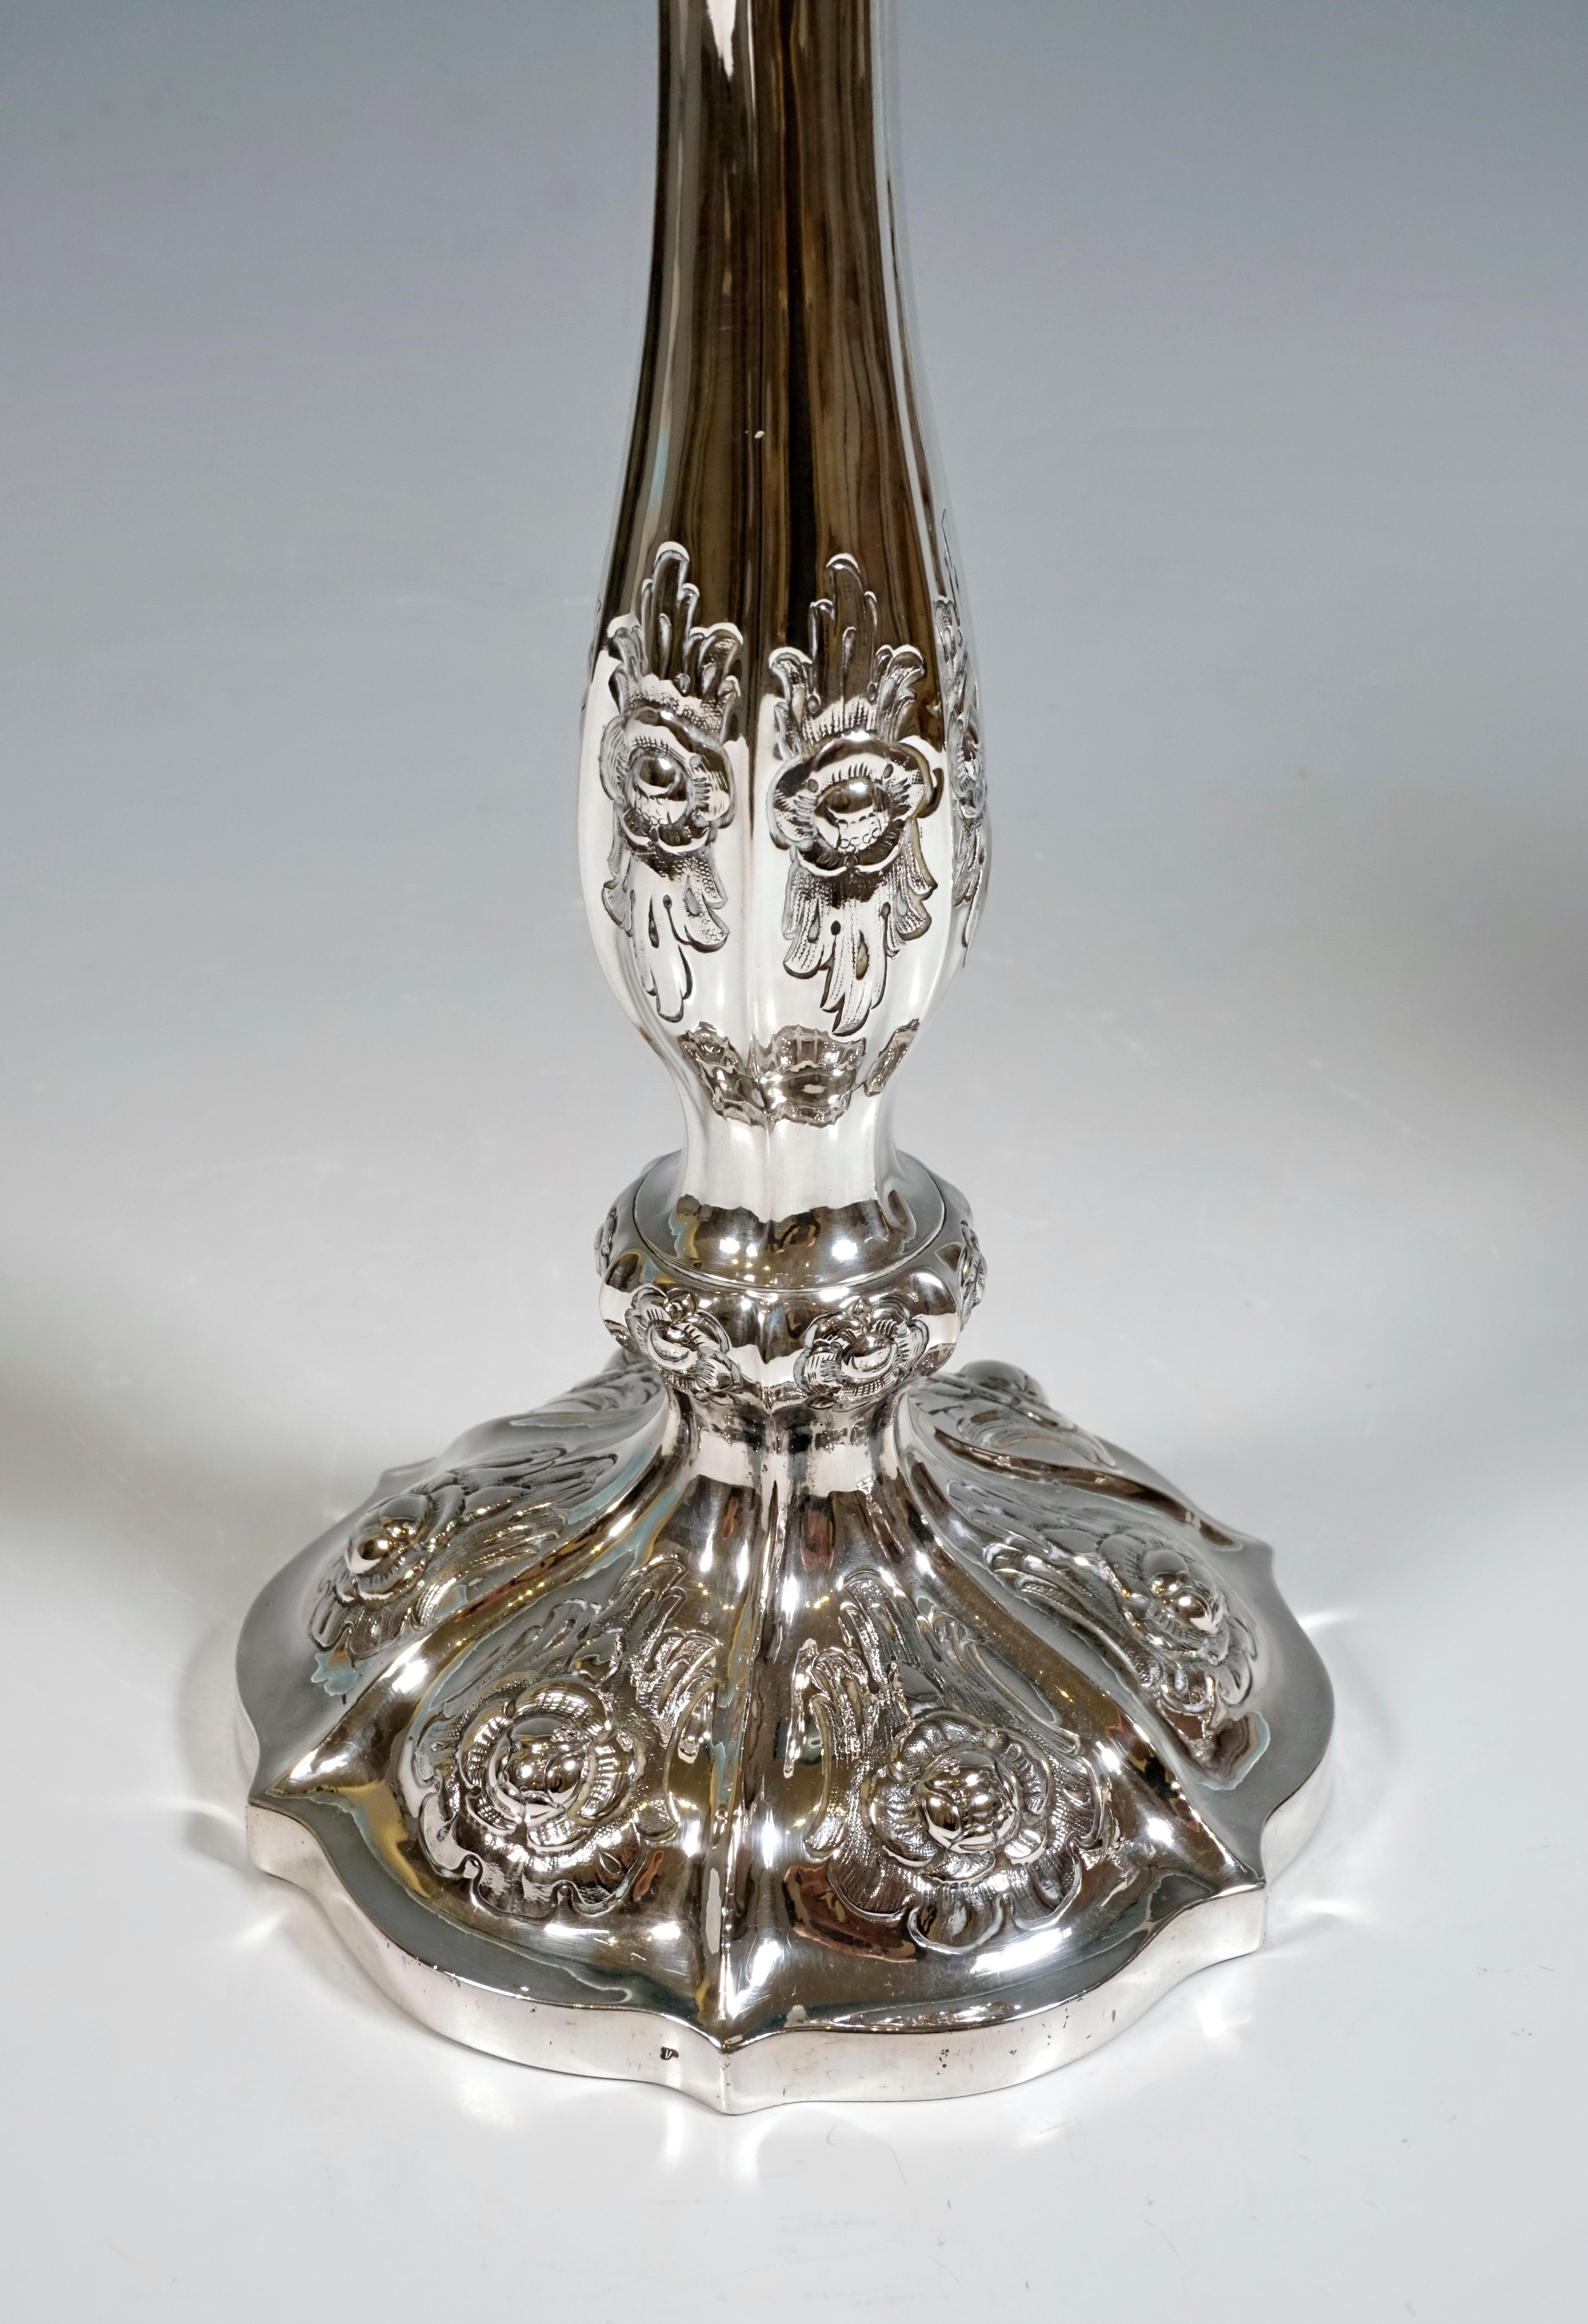 Austrian Pair of Antique Vienna Biedermeier Silver Candle Holders, Dated 1856 For Sale